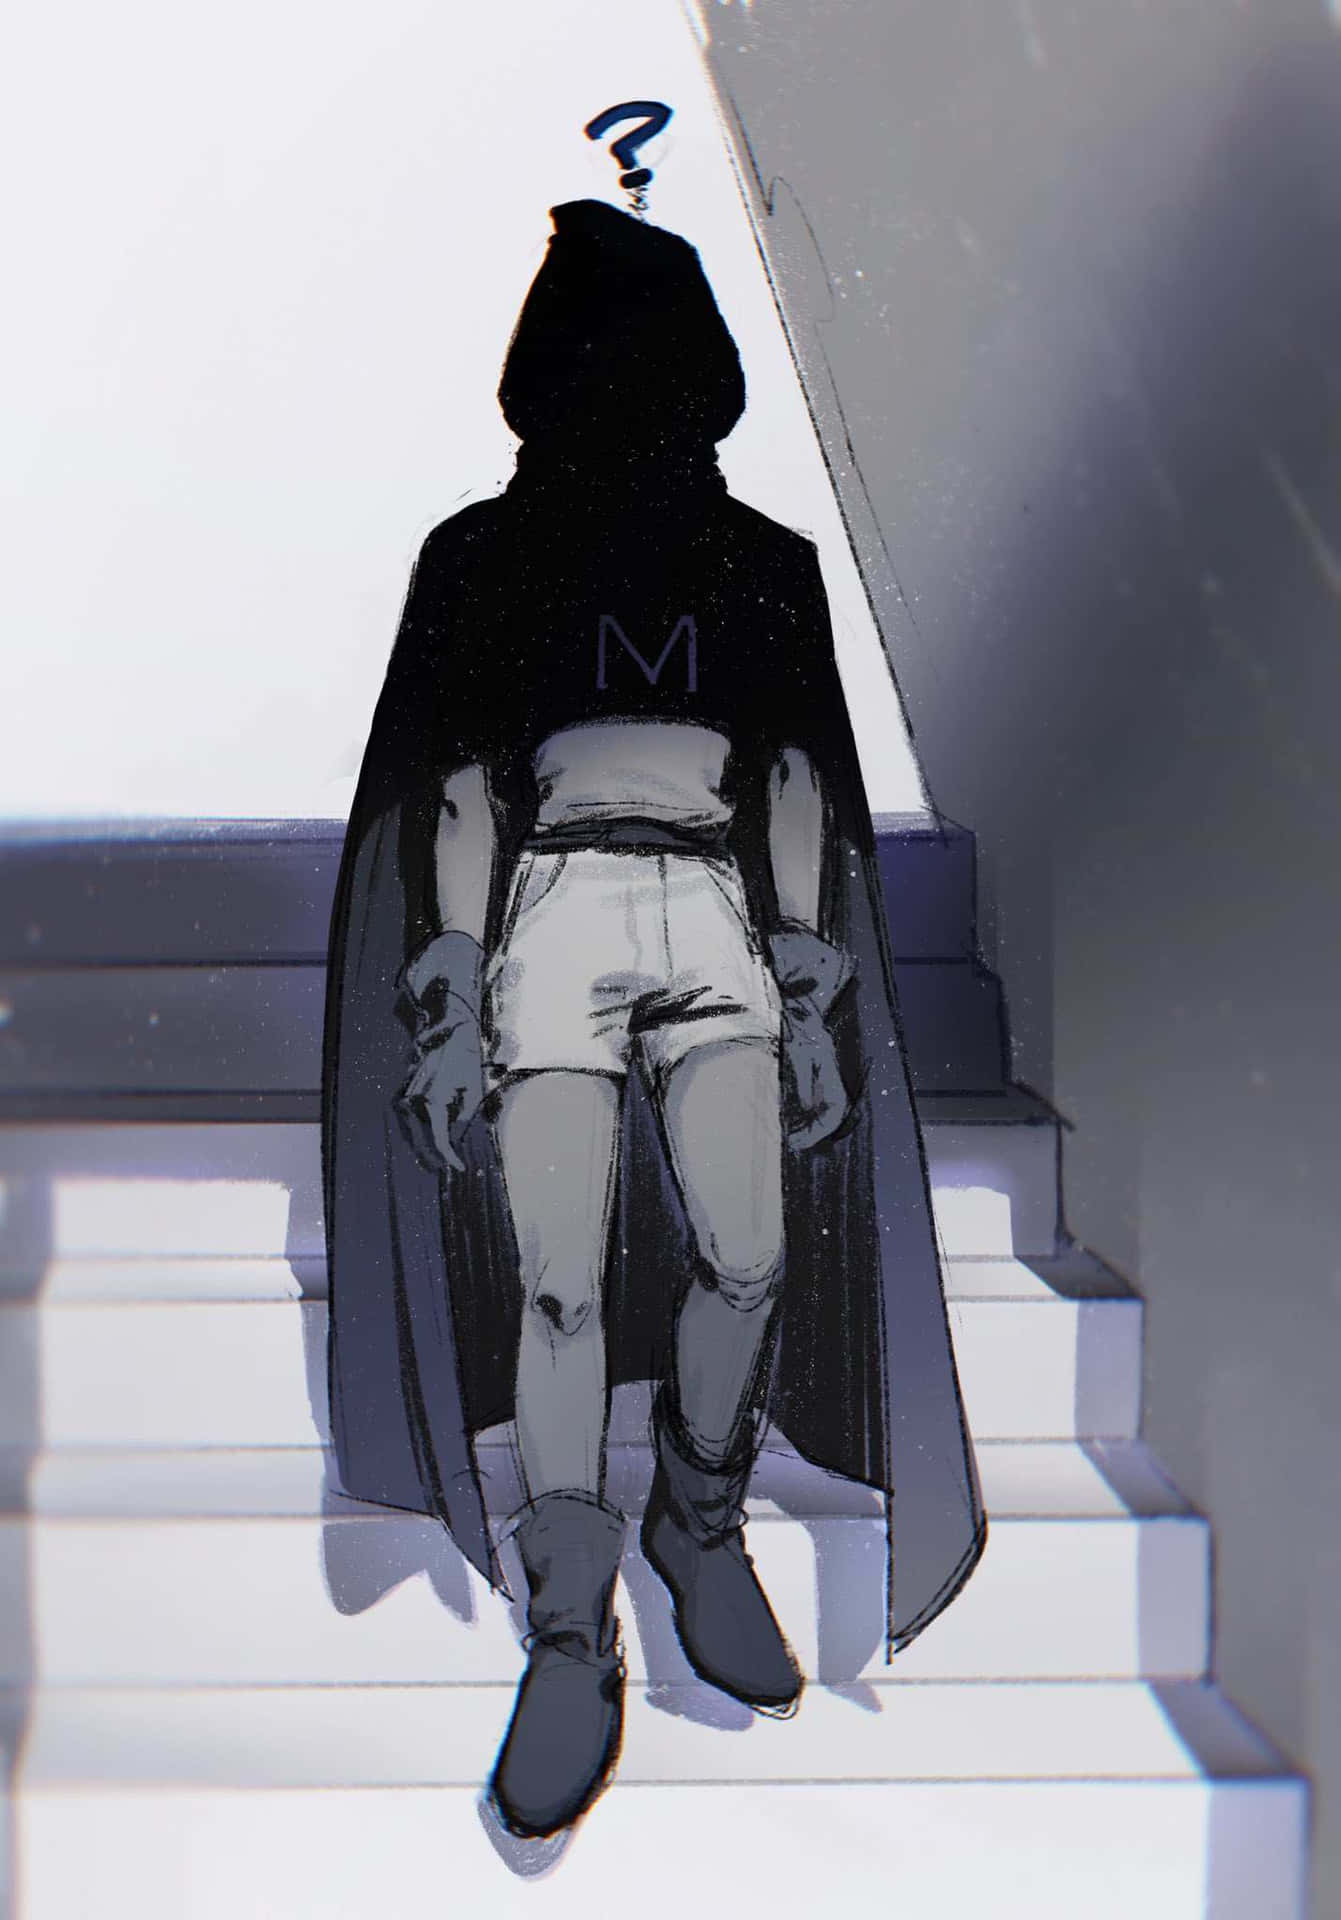 Mysterion Silhouetteon Stairs Wallpaper